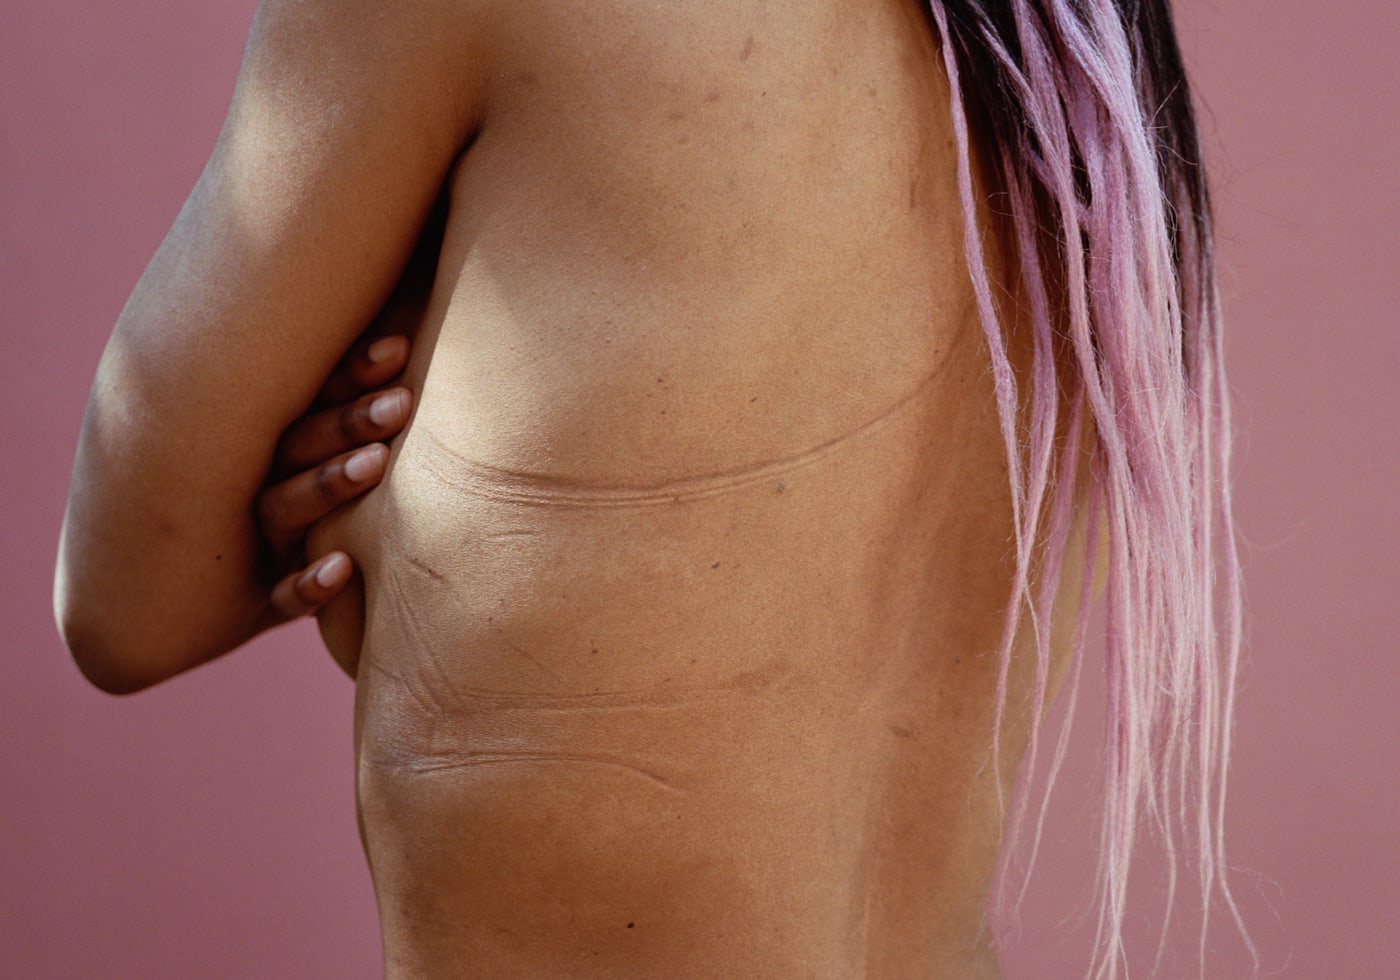 Image showing a womans back with with string marks from an incorrectly sized bra.